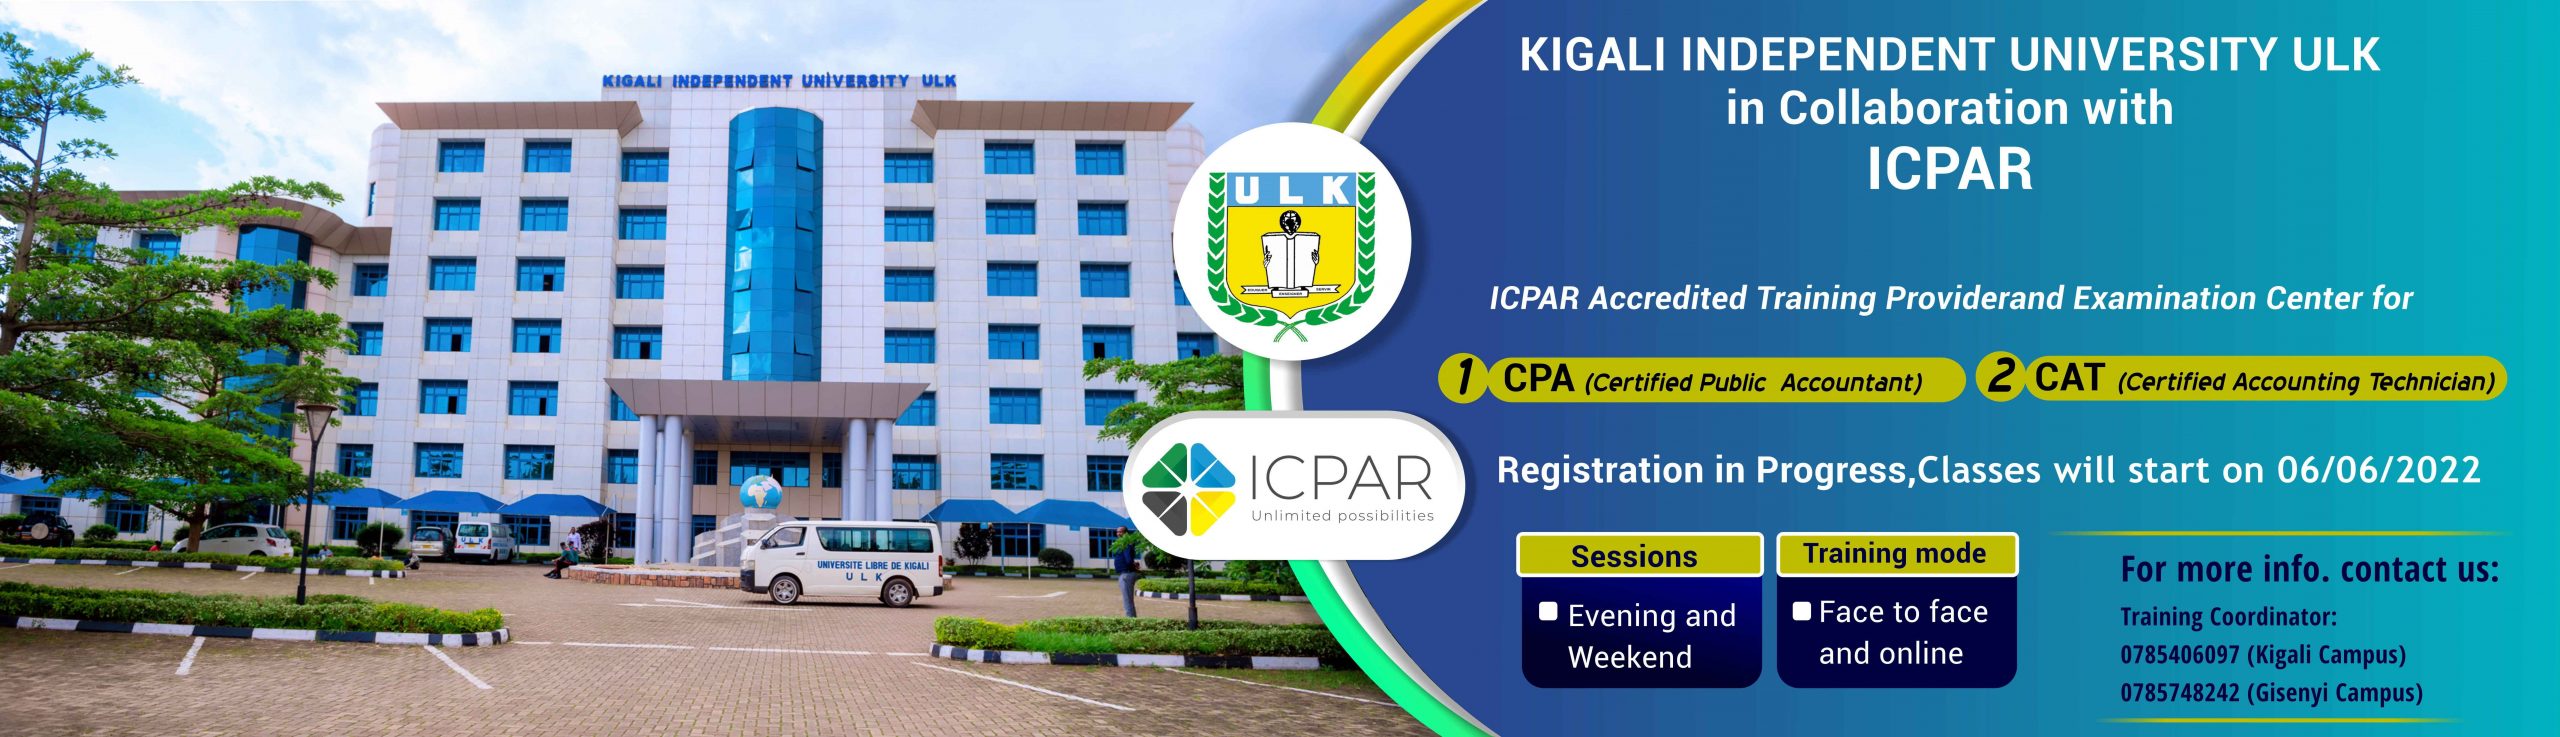 ULK in collaboration with ICPAR